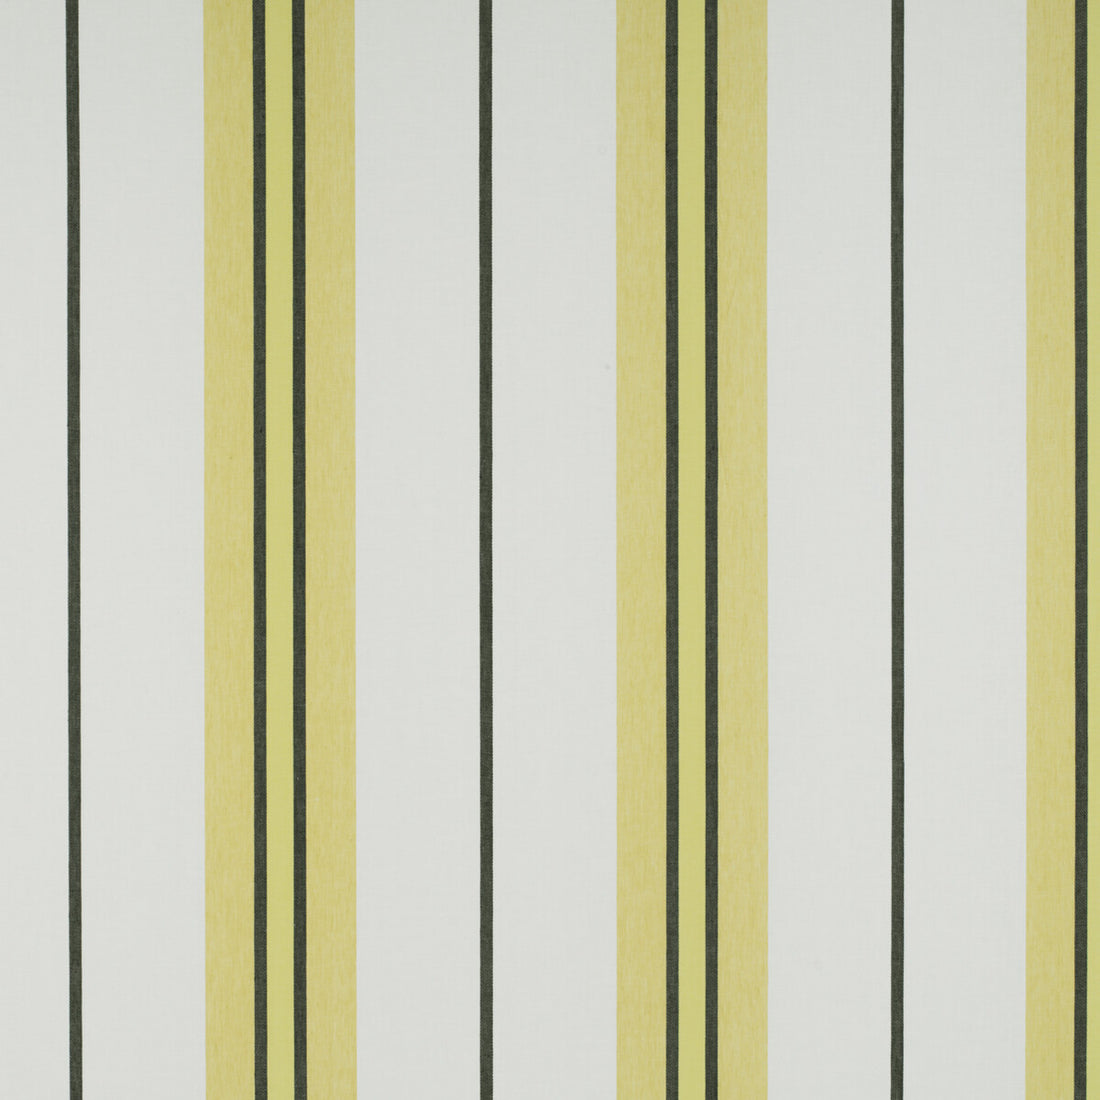 Burano fabric in onyx/amarillo color - pattern GDT5310.001.0 - by Gaston y Daniela in the Tierras collection